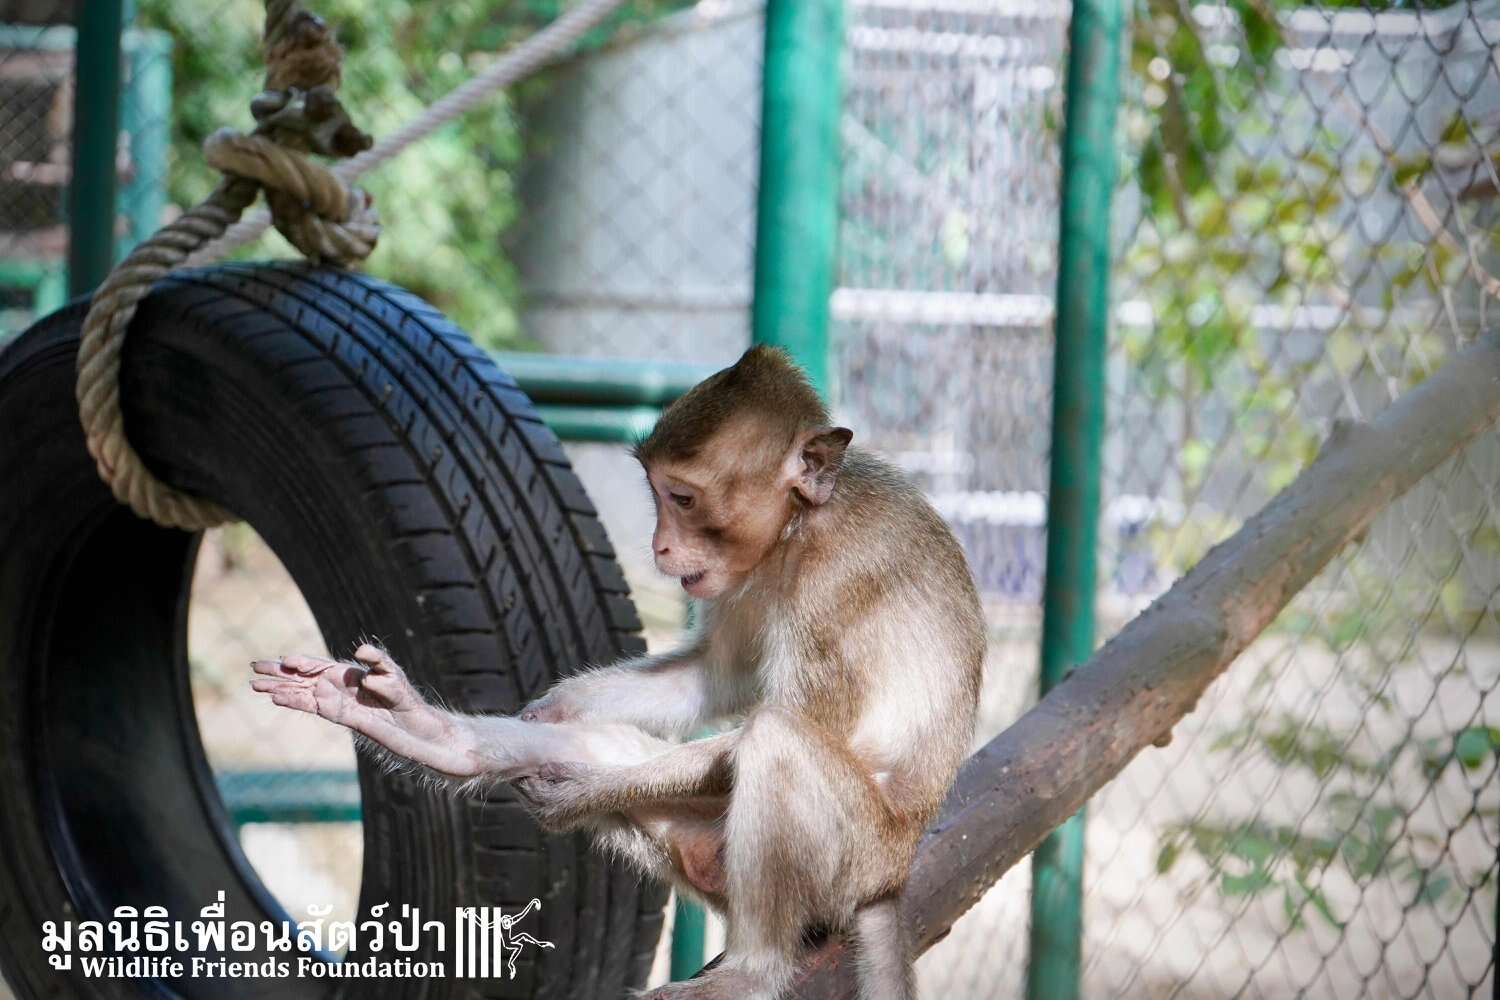 Macaque saved from being someone's pet in Thailand